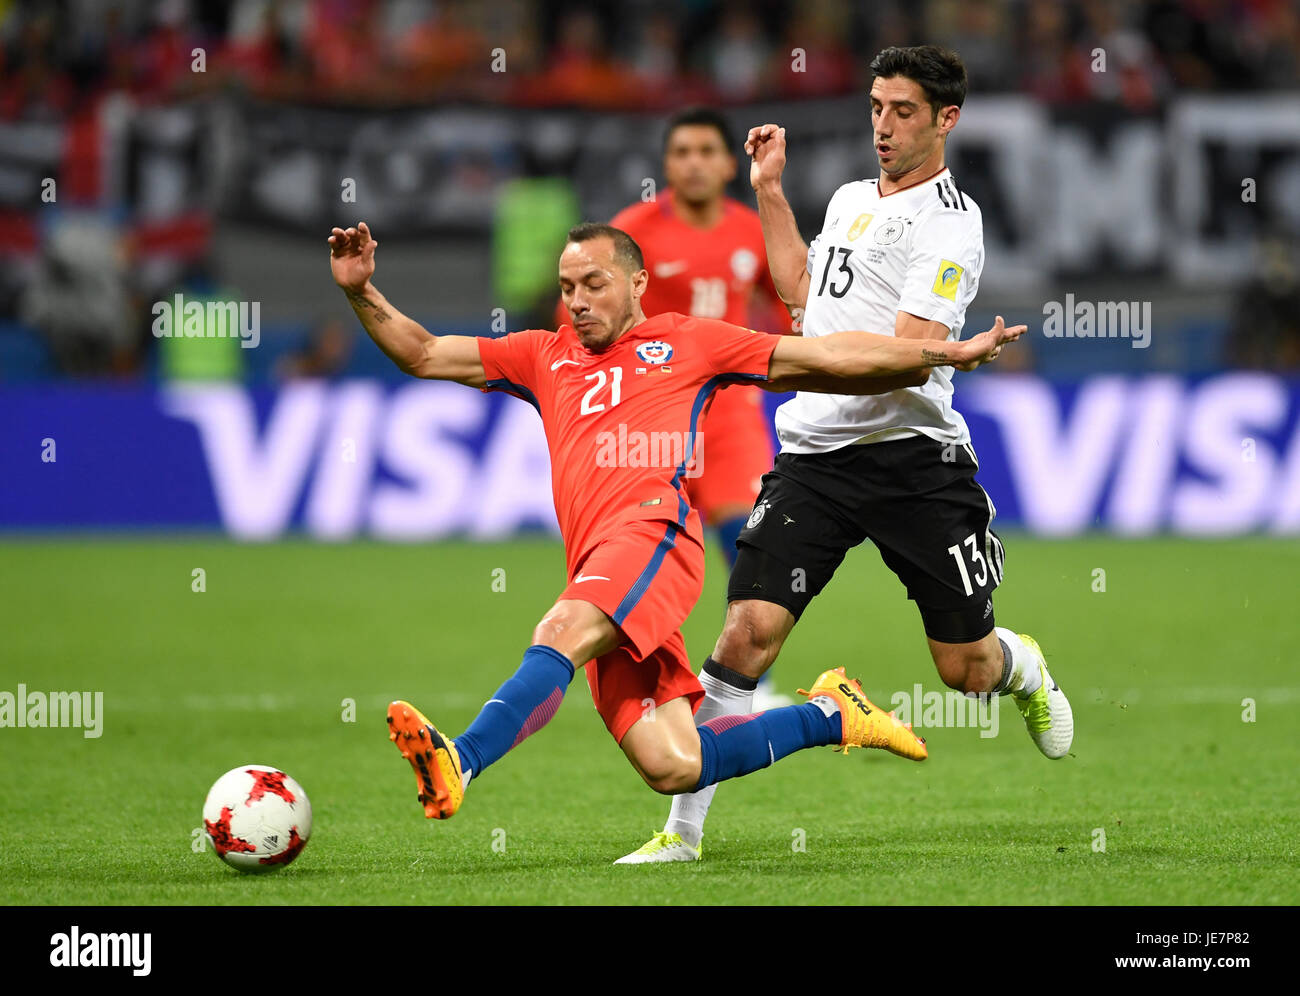 Kazan, Russia. 22nd June, 2017. Germany's Lars Stindl (R) and Marcelo Diaz from Chile vie for the ball during the Group B preliminary stage soccer match between Chile and Germany at the Confederations Cup in Kazan, Russia, 22 June 2017. Photo: Marius Becker/dpa/Alamy Live News Stock Photo